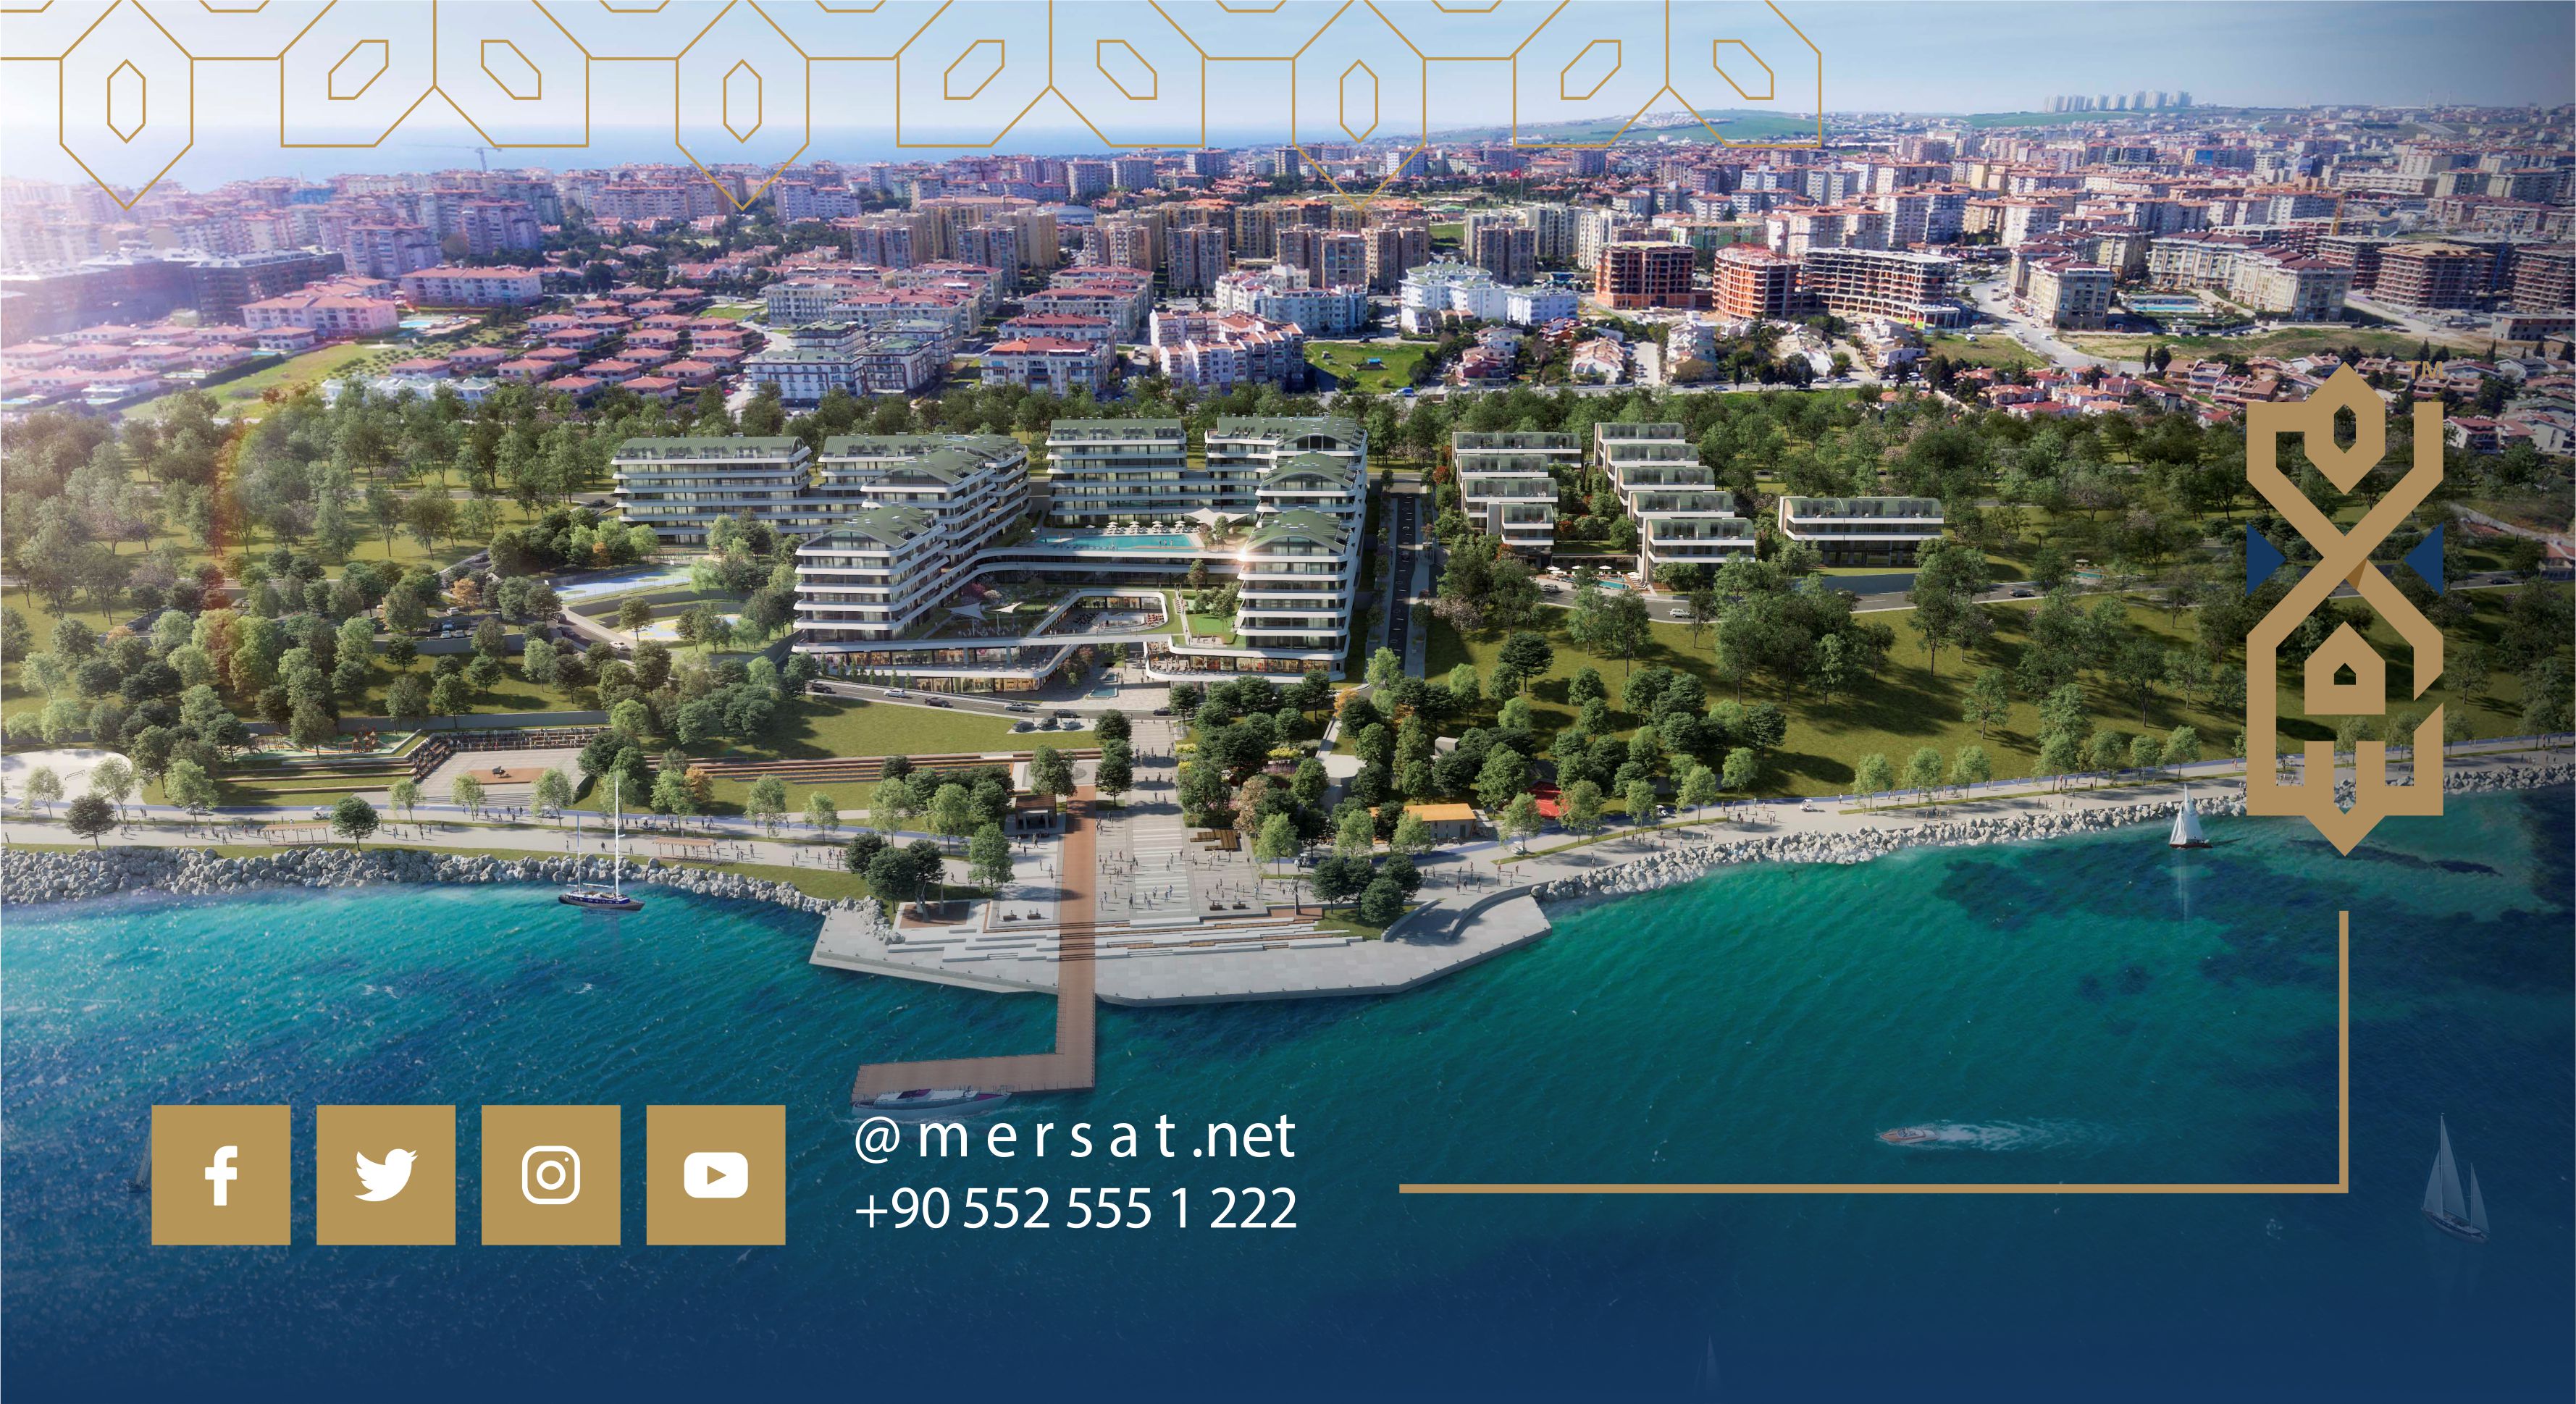 The Marmara Sea region is the most important real estate investment area in Turkey